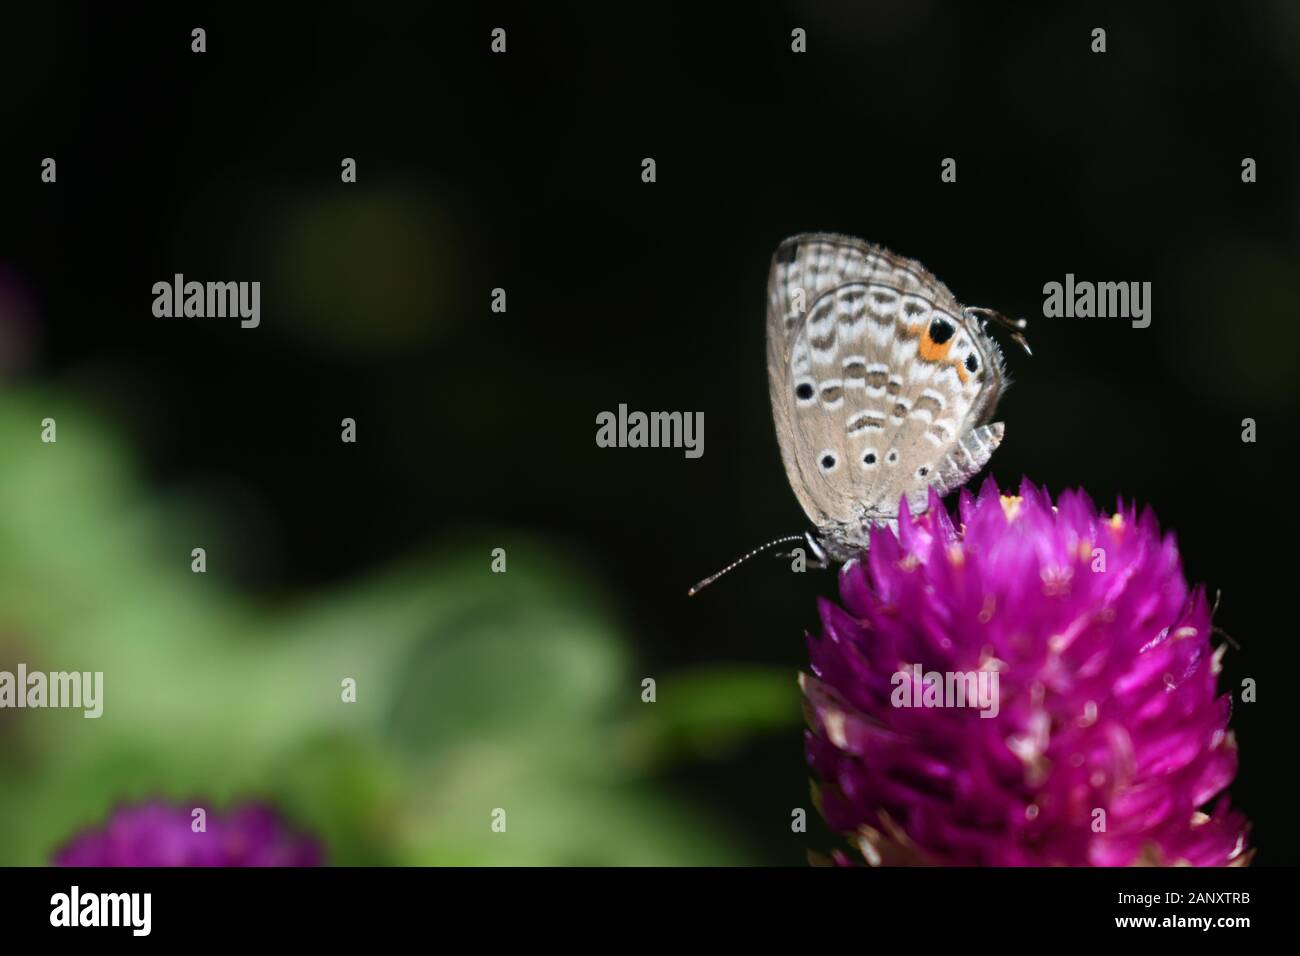 Close up photo of forget-me-not butterfly perched on a globe amaranth flower. Surakarta, Indonesia. Stock Photo